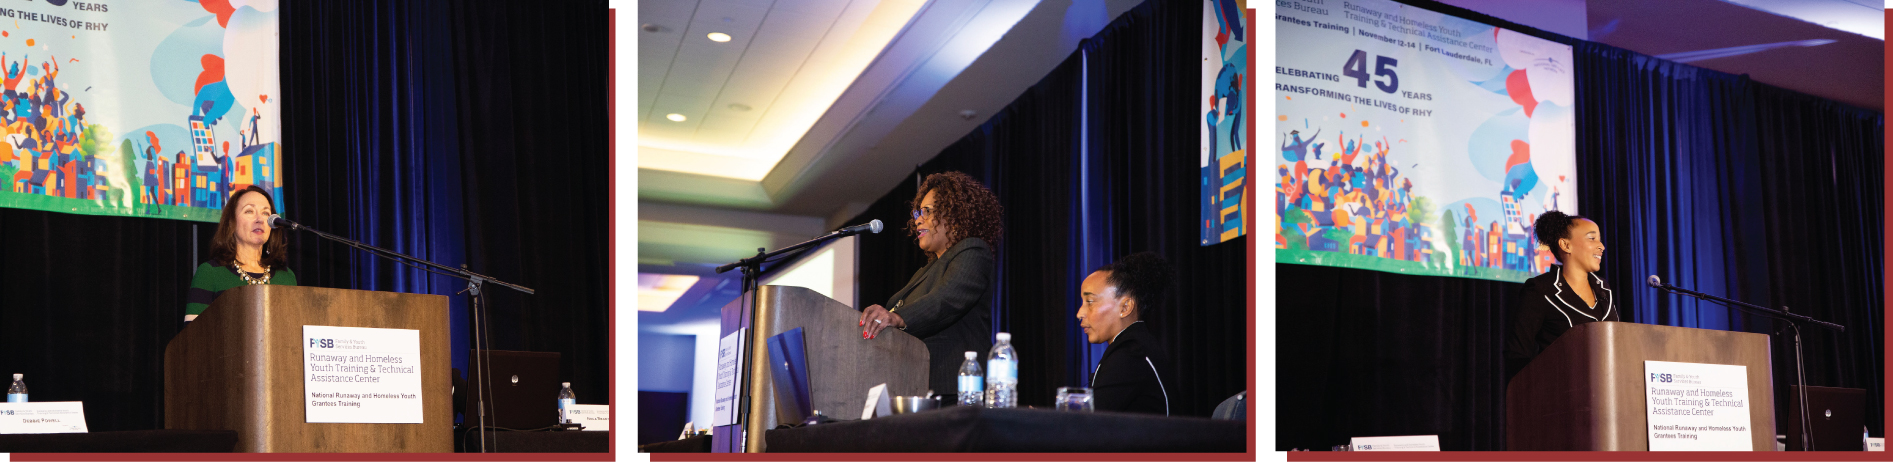 Three images - the first is of Commissioner Elizabeth Darling speaking on stage. The second is of Deputy Associate Commissioner Debbie Powell speaking, and the third image is Nola Brantley providing her keynote at the 2019 National RHY Grantees Training's opening session.